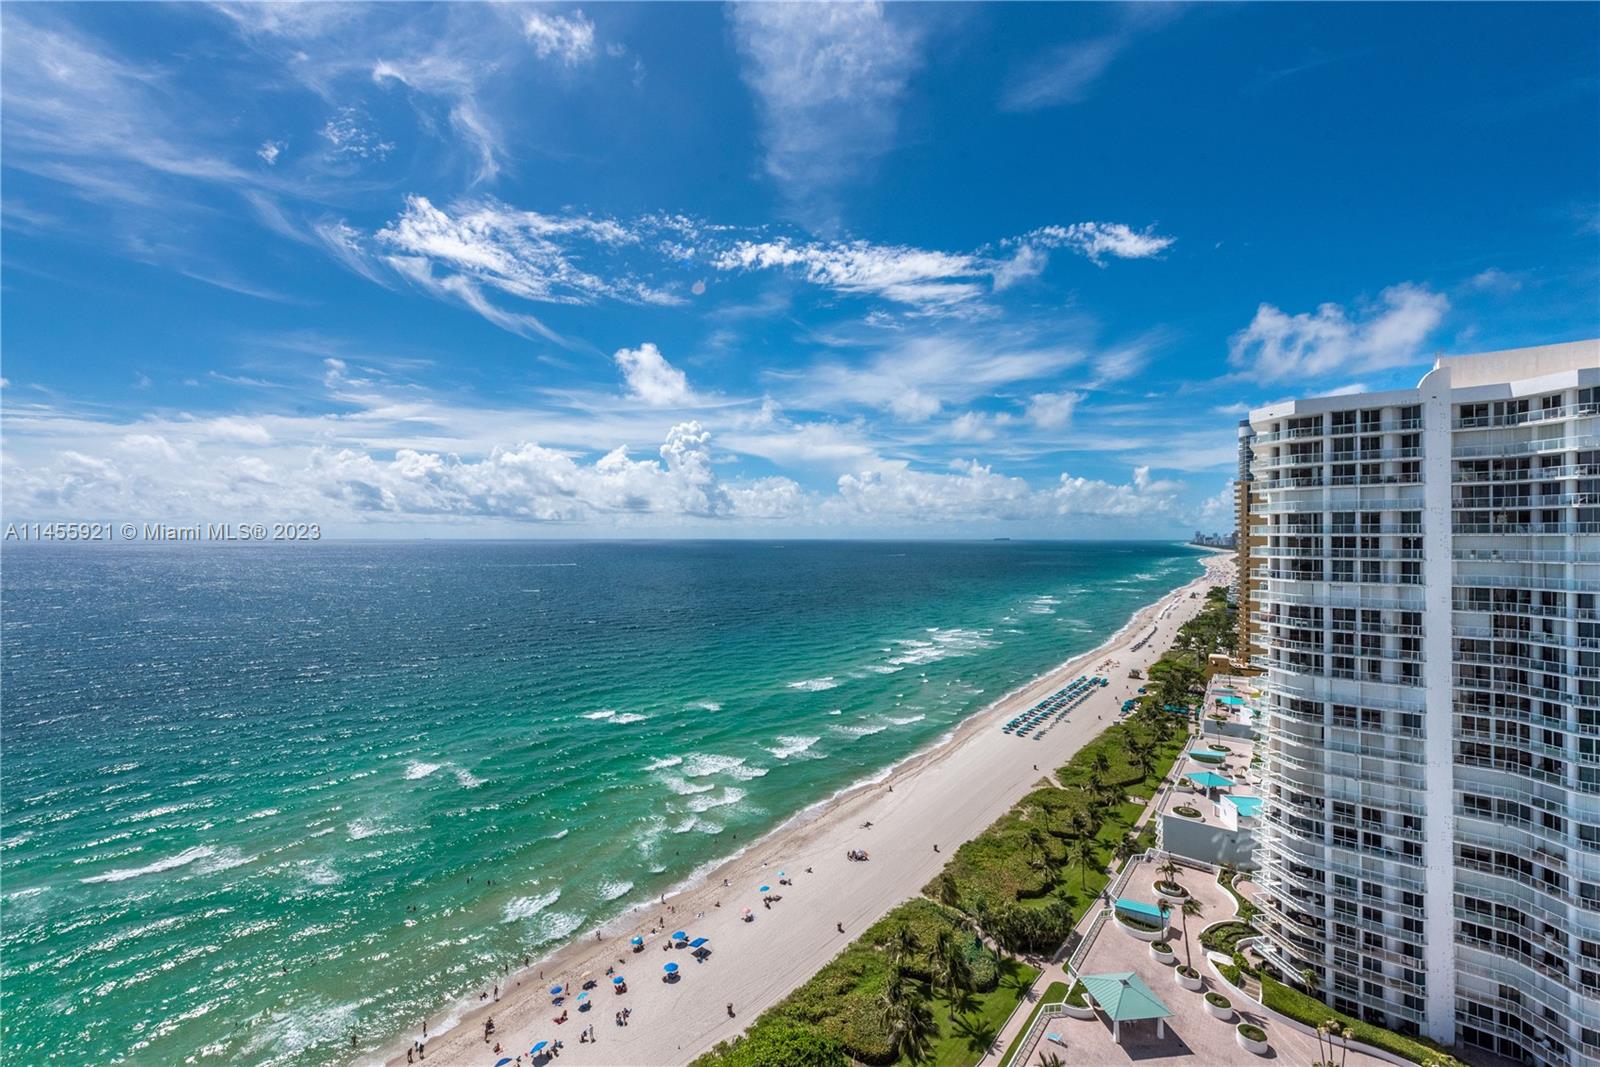 In the heart of Sunny Isles, enjoy resort-style living in large 2 bedroom/2.5 bath plus office with king size folding sofa. Apartment is upgraded, tastefully decorated, fully furnished & equipped for family vacation and has desirable south-east view of the ocean, intracoastal & city from 3 terraces. Resort-style amenities include beach service, pool, new fitness center, jacuzzi, pool cabanas, concierge, valet parking, kids room, 24 hours security. Walking distance to all shops & restaurants. Walk to shopping, entertainment and public transportation. Minutes to Aventura Mall, Gulfstream Casino & Bal Harbour Shops. Price for seasonable short term rentals may varies per season & length of stay. STR-01852 Tax 13% will be added. Available from April 4, 2024